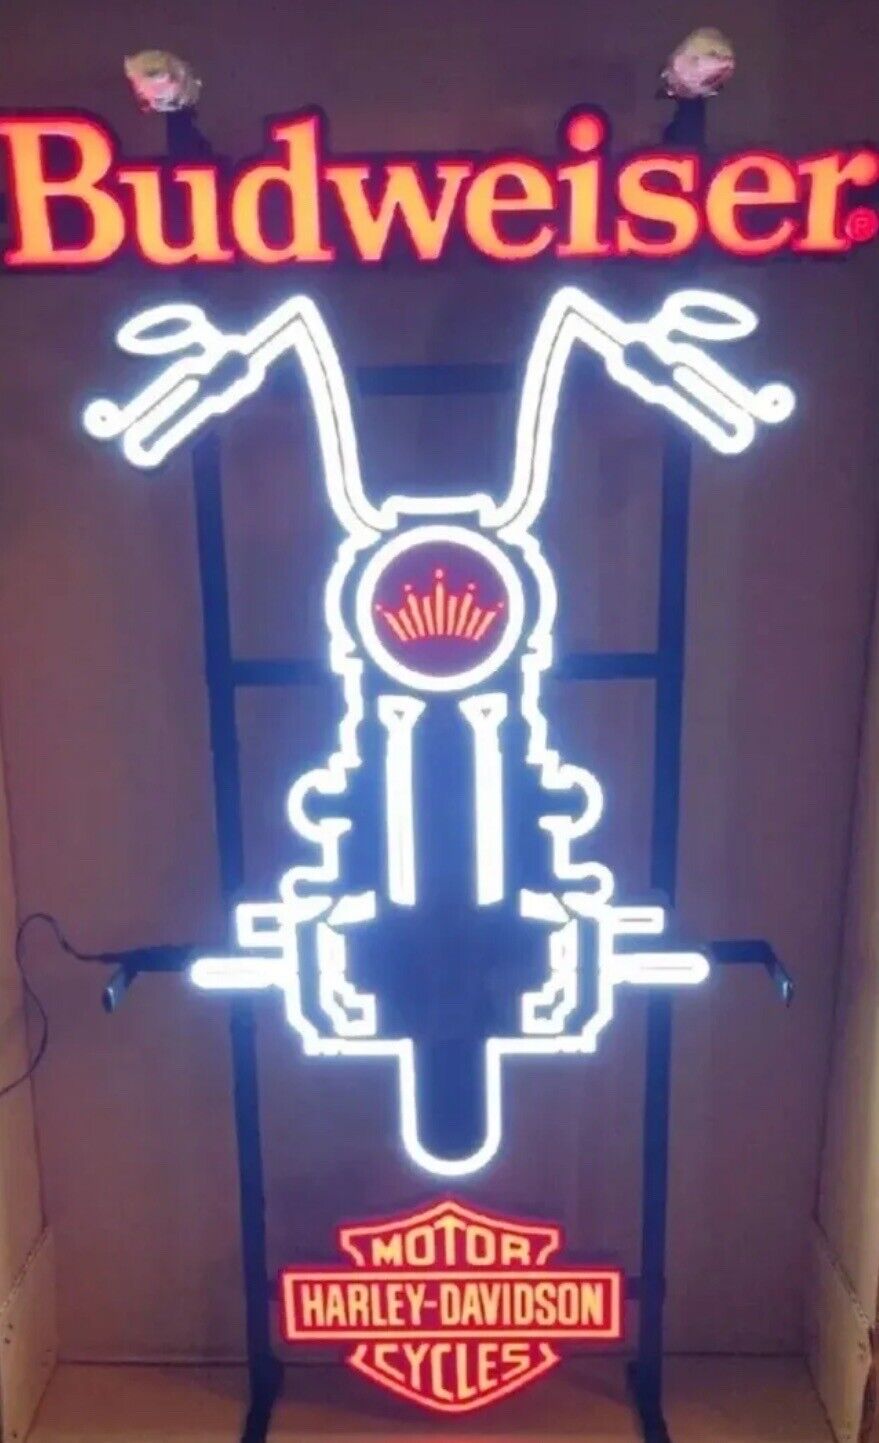 OFFICIAL BUDWEISER HARLEY DAVIDSON MOTORCYCLE LED SIGN NEW IN THE BOX